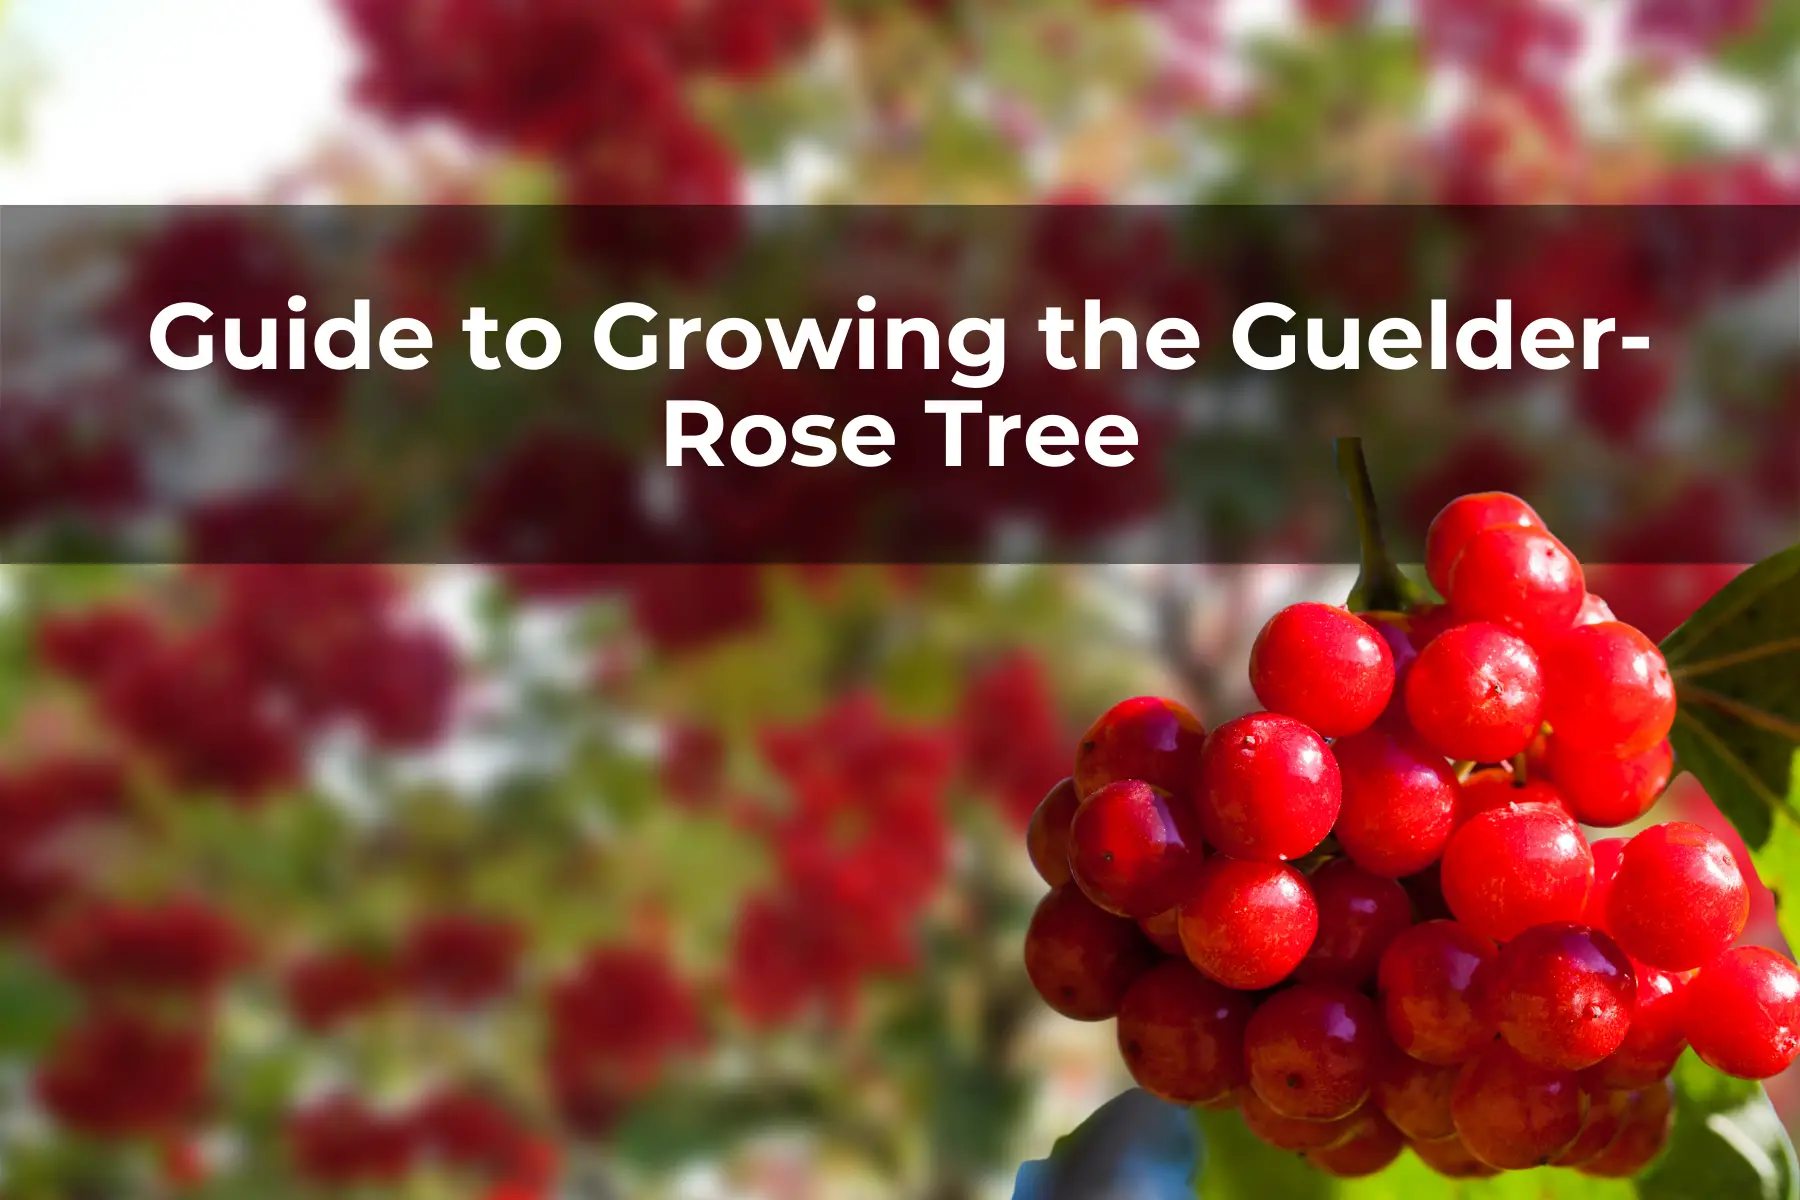 Guide to Growing the Guelder-Rose Tree